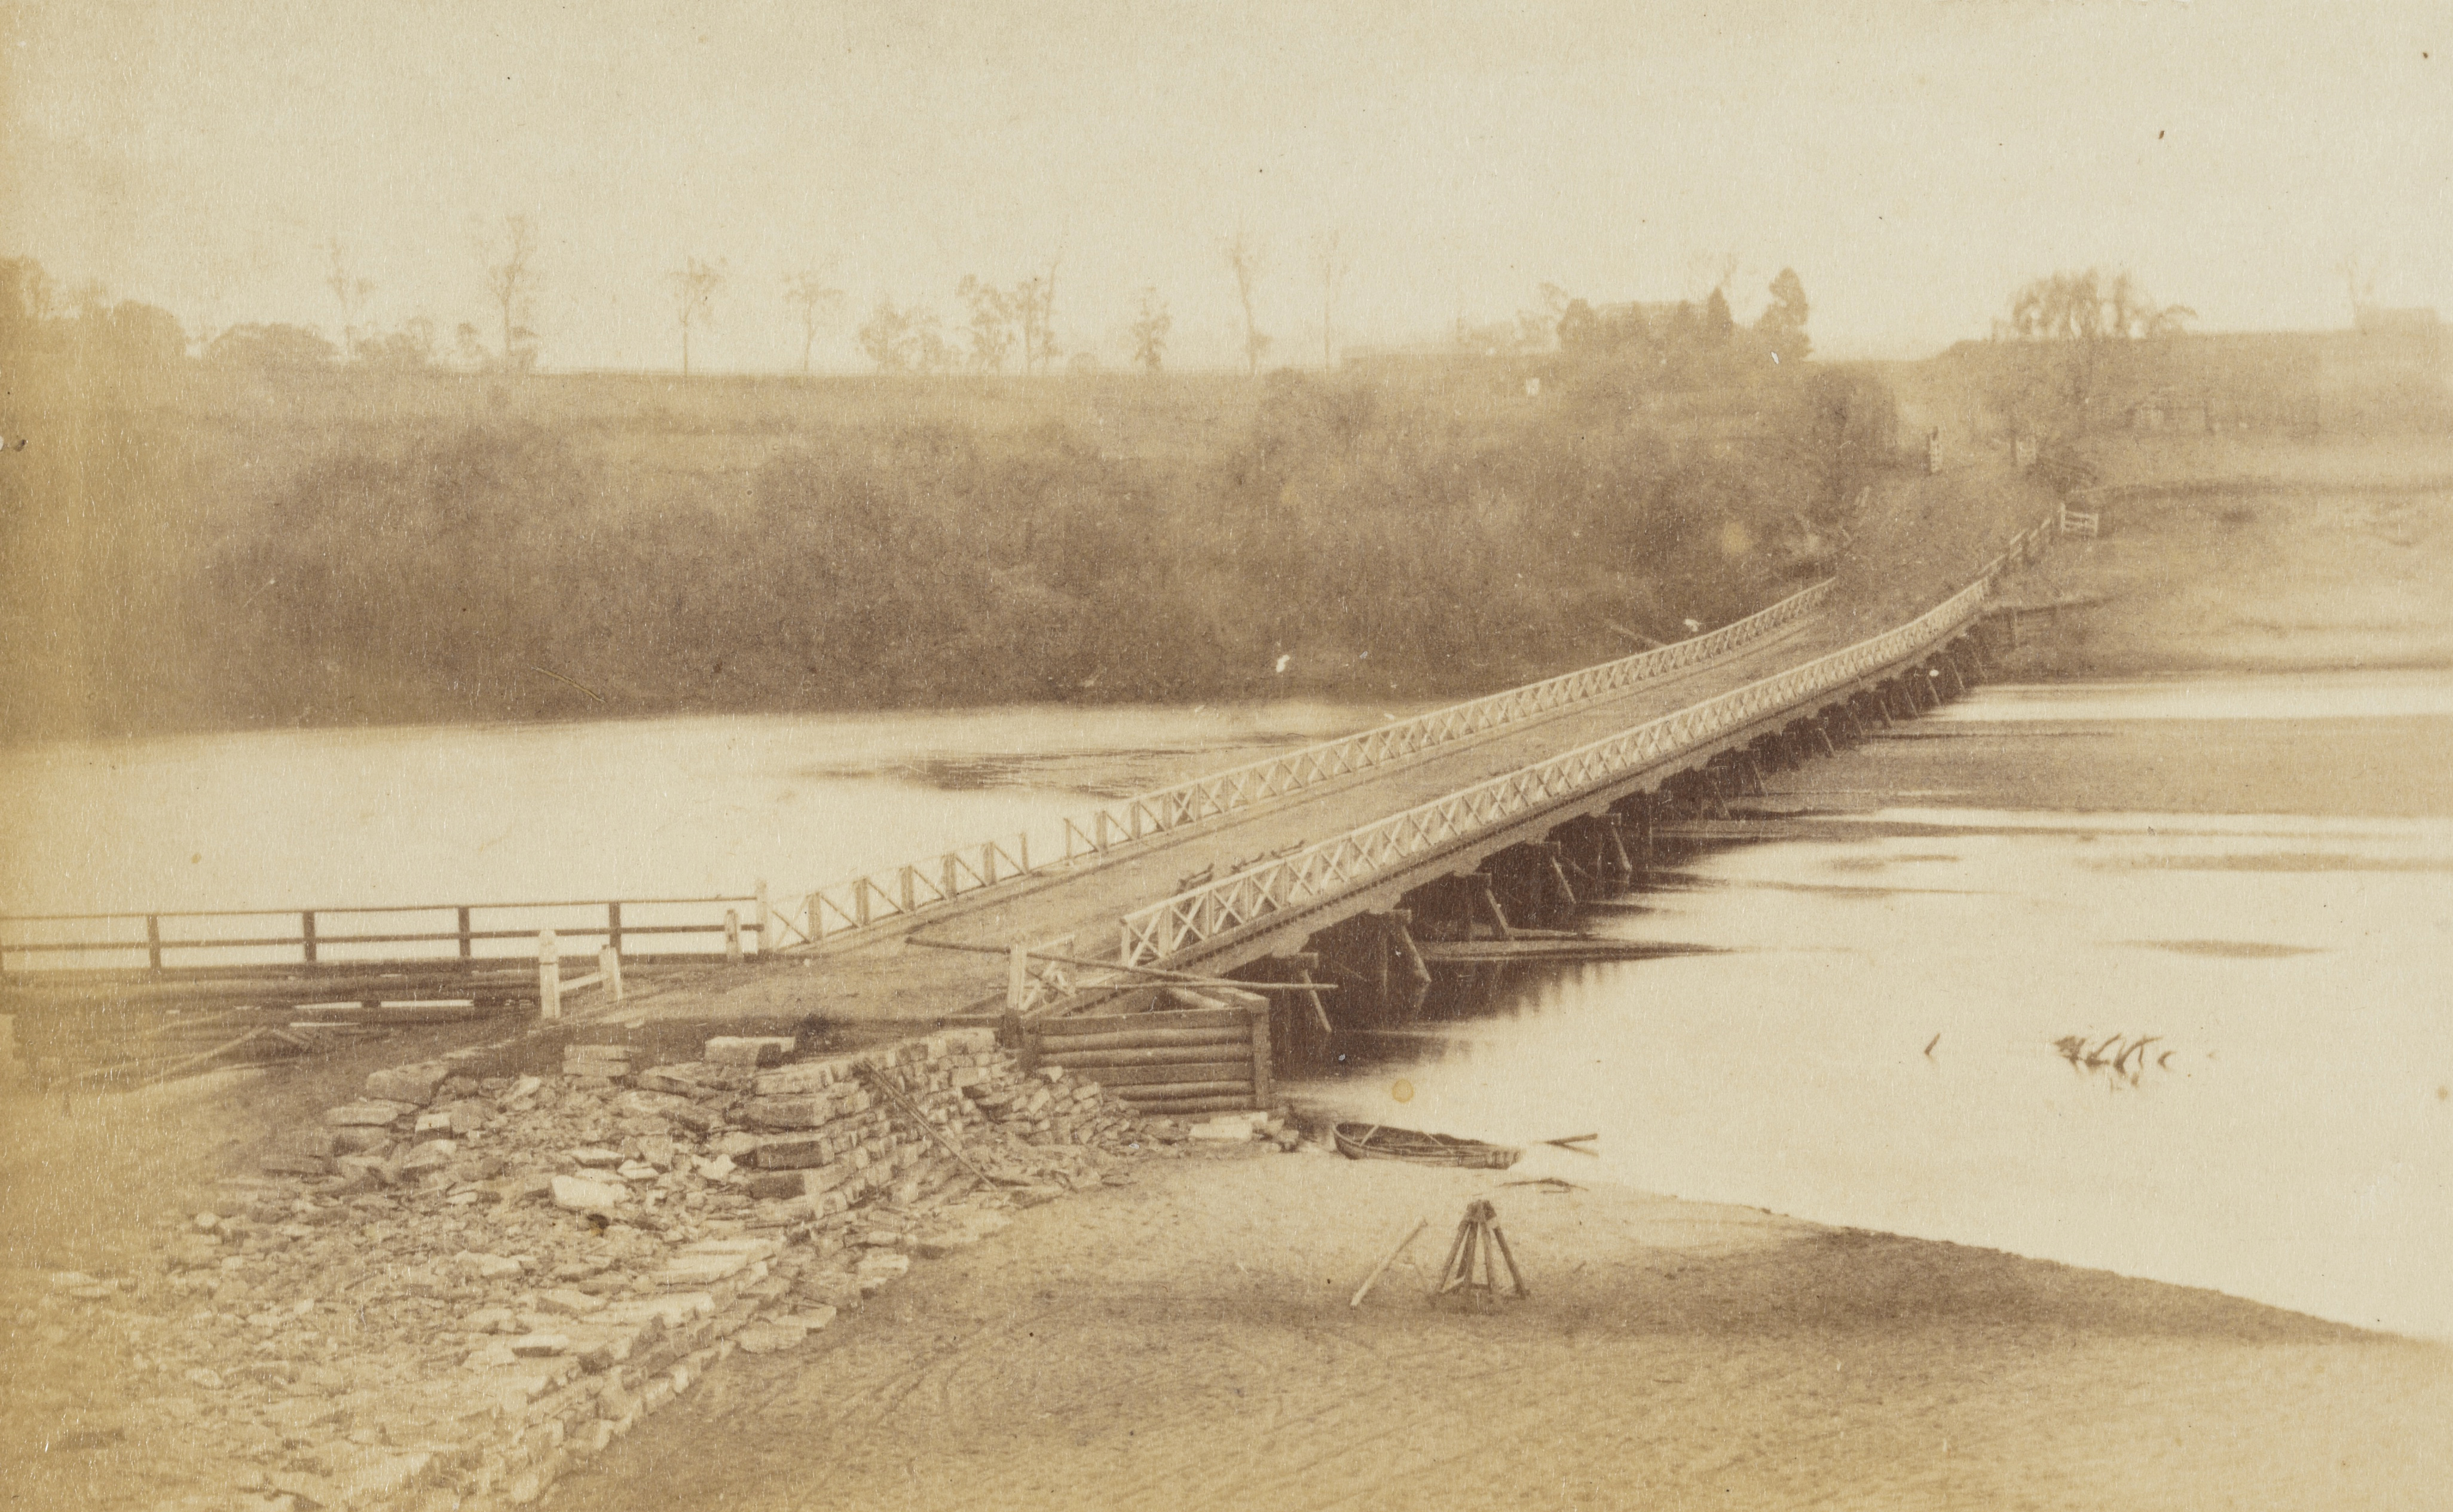 View of the North Richmond River bridge undergoing repairs, Sydney, ca. 1871, American and Australasian Photographic Company